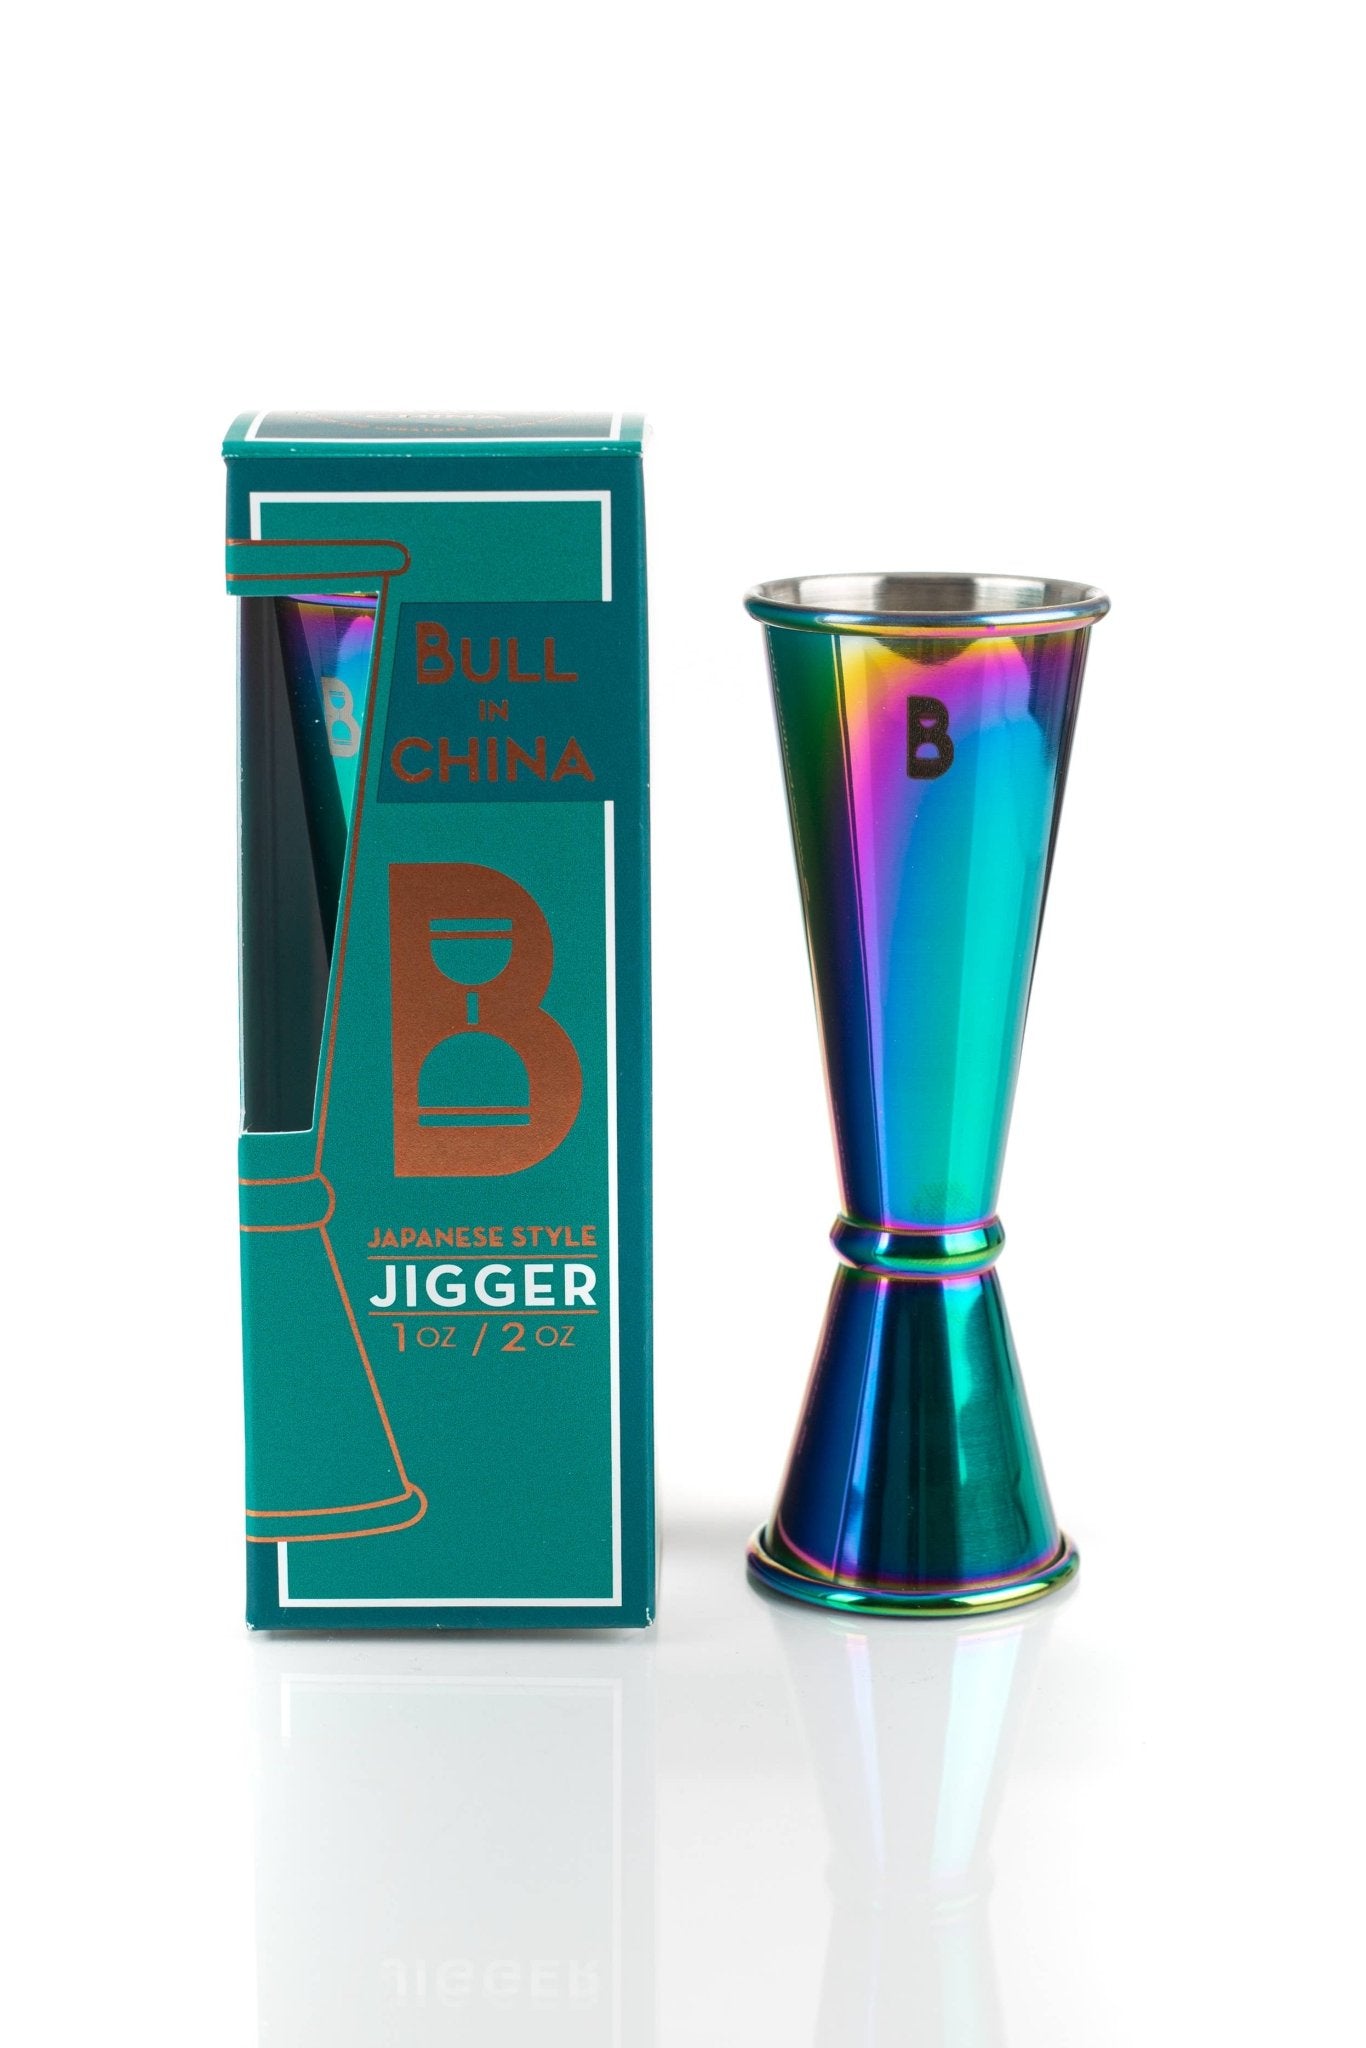 Japanese-Style Cocktail Jigger - Durham DistilleryCocktail Shakers &amp; ToolsShop for Pickup